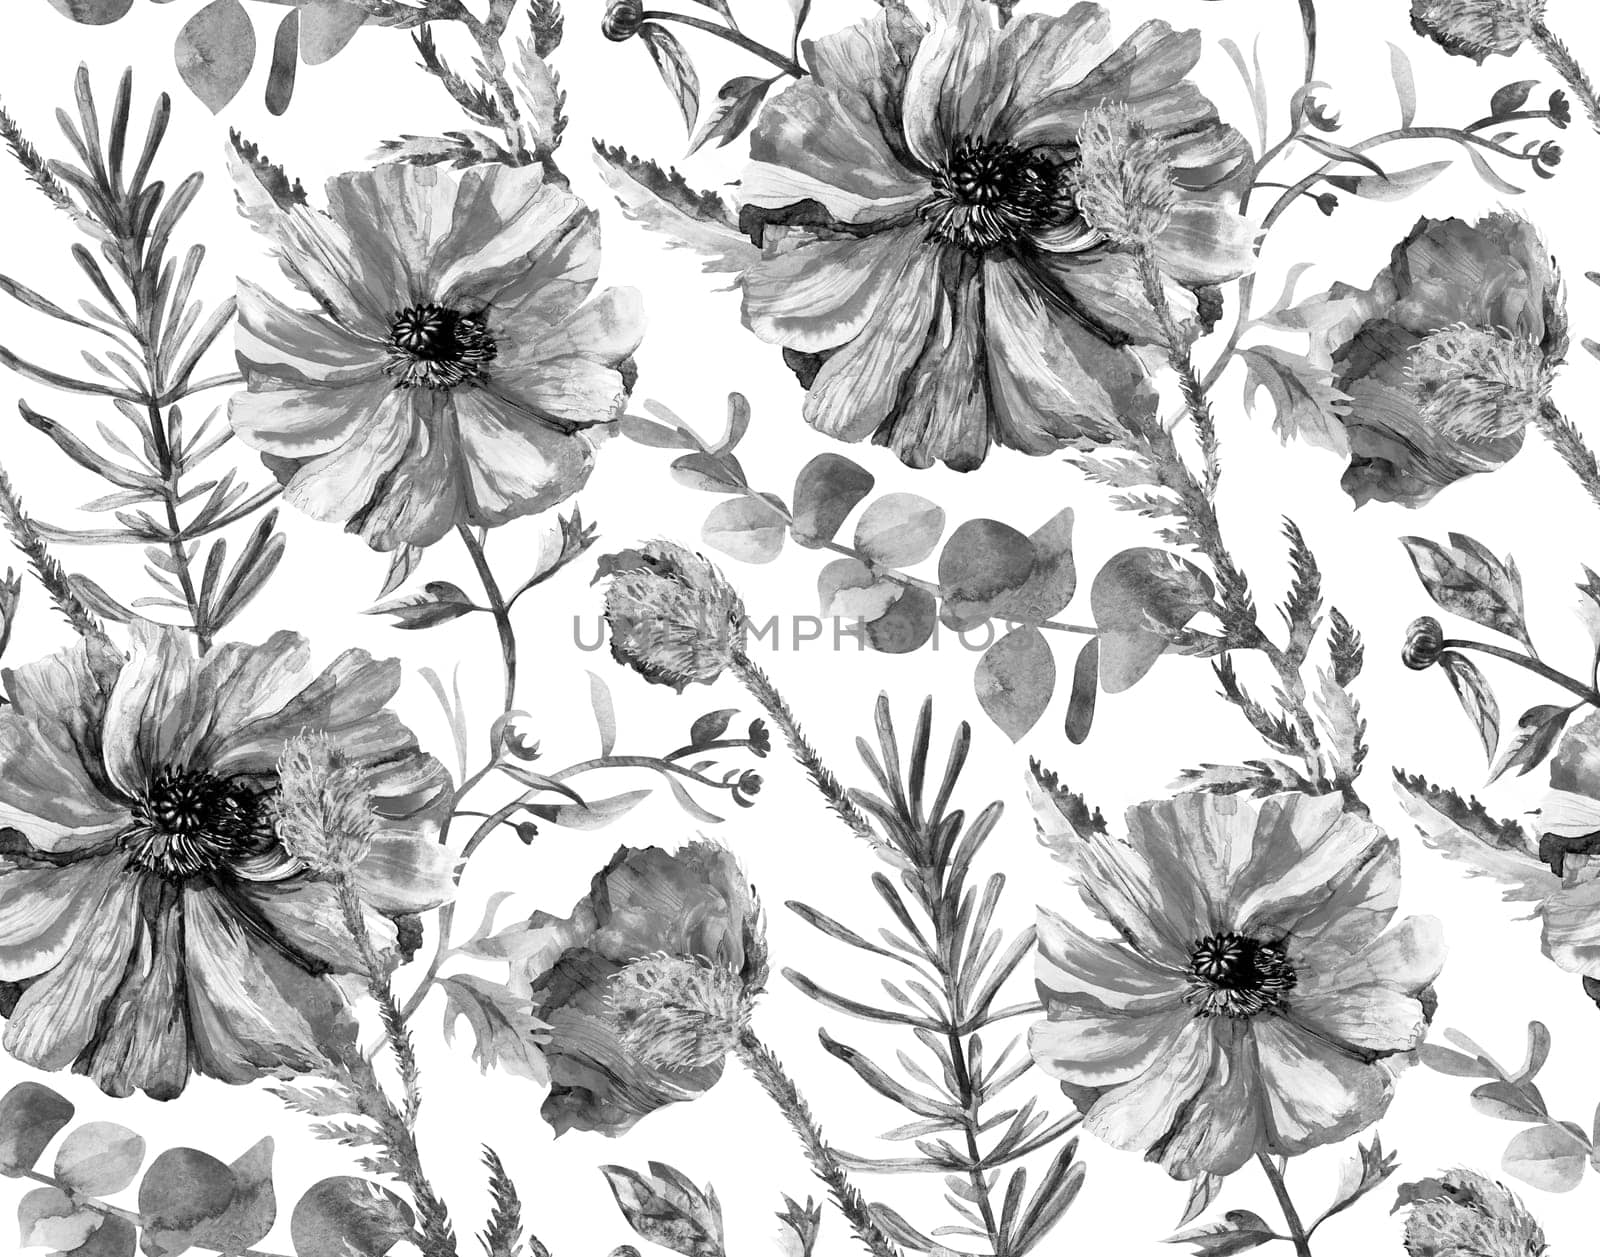 Black and white realistic seamless pattern with poppy flowers on a white background painted in watercolor in vintage style for textile and surface design